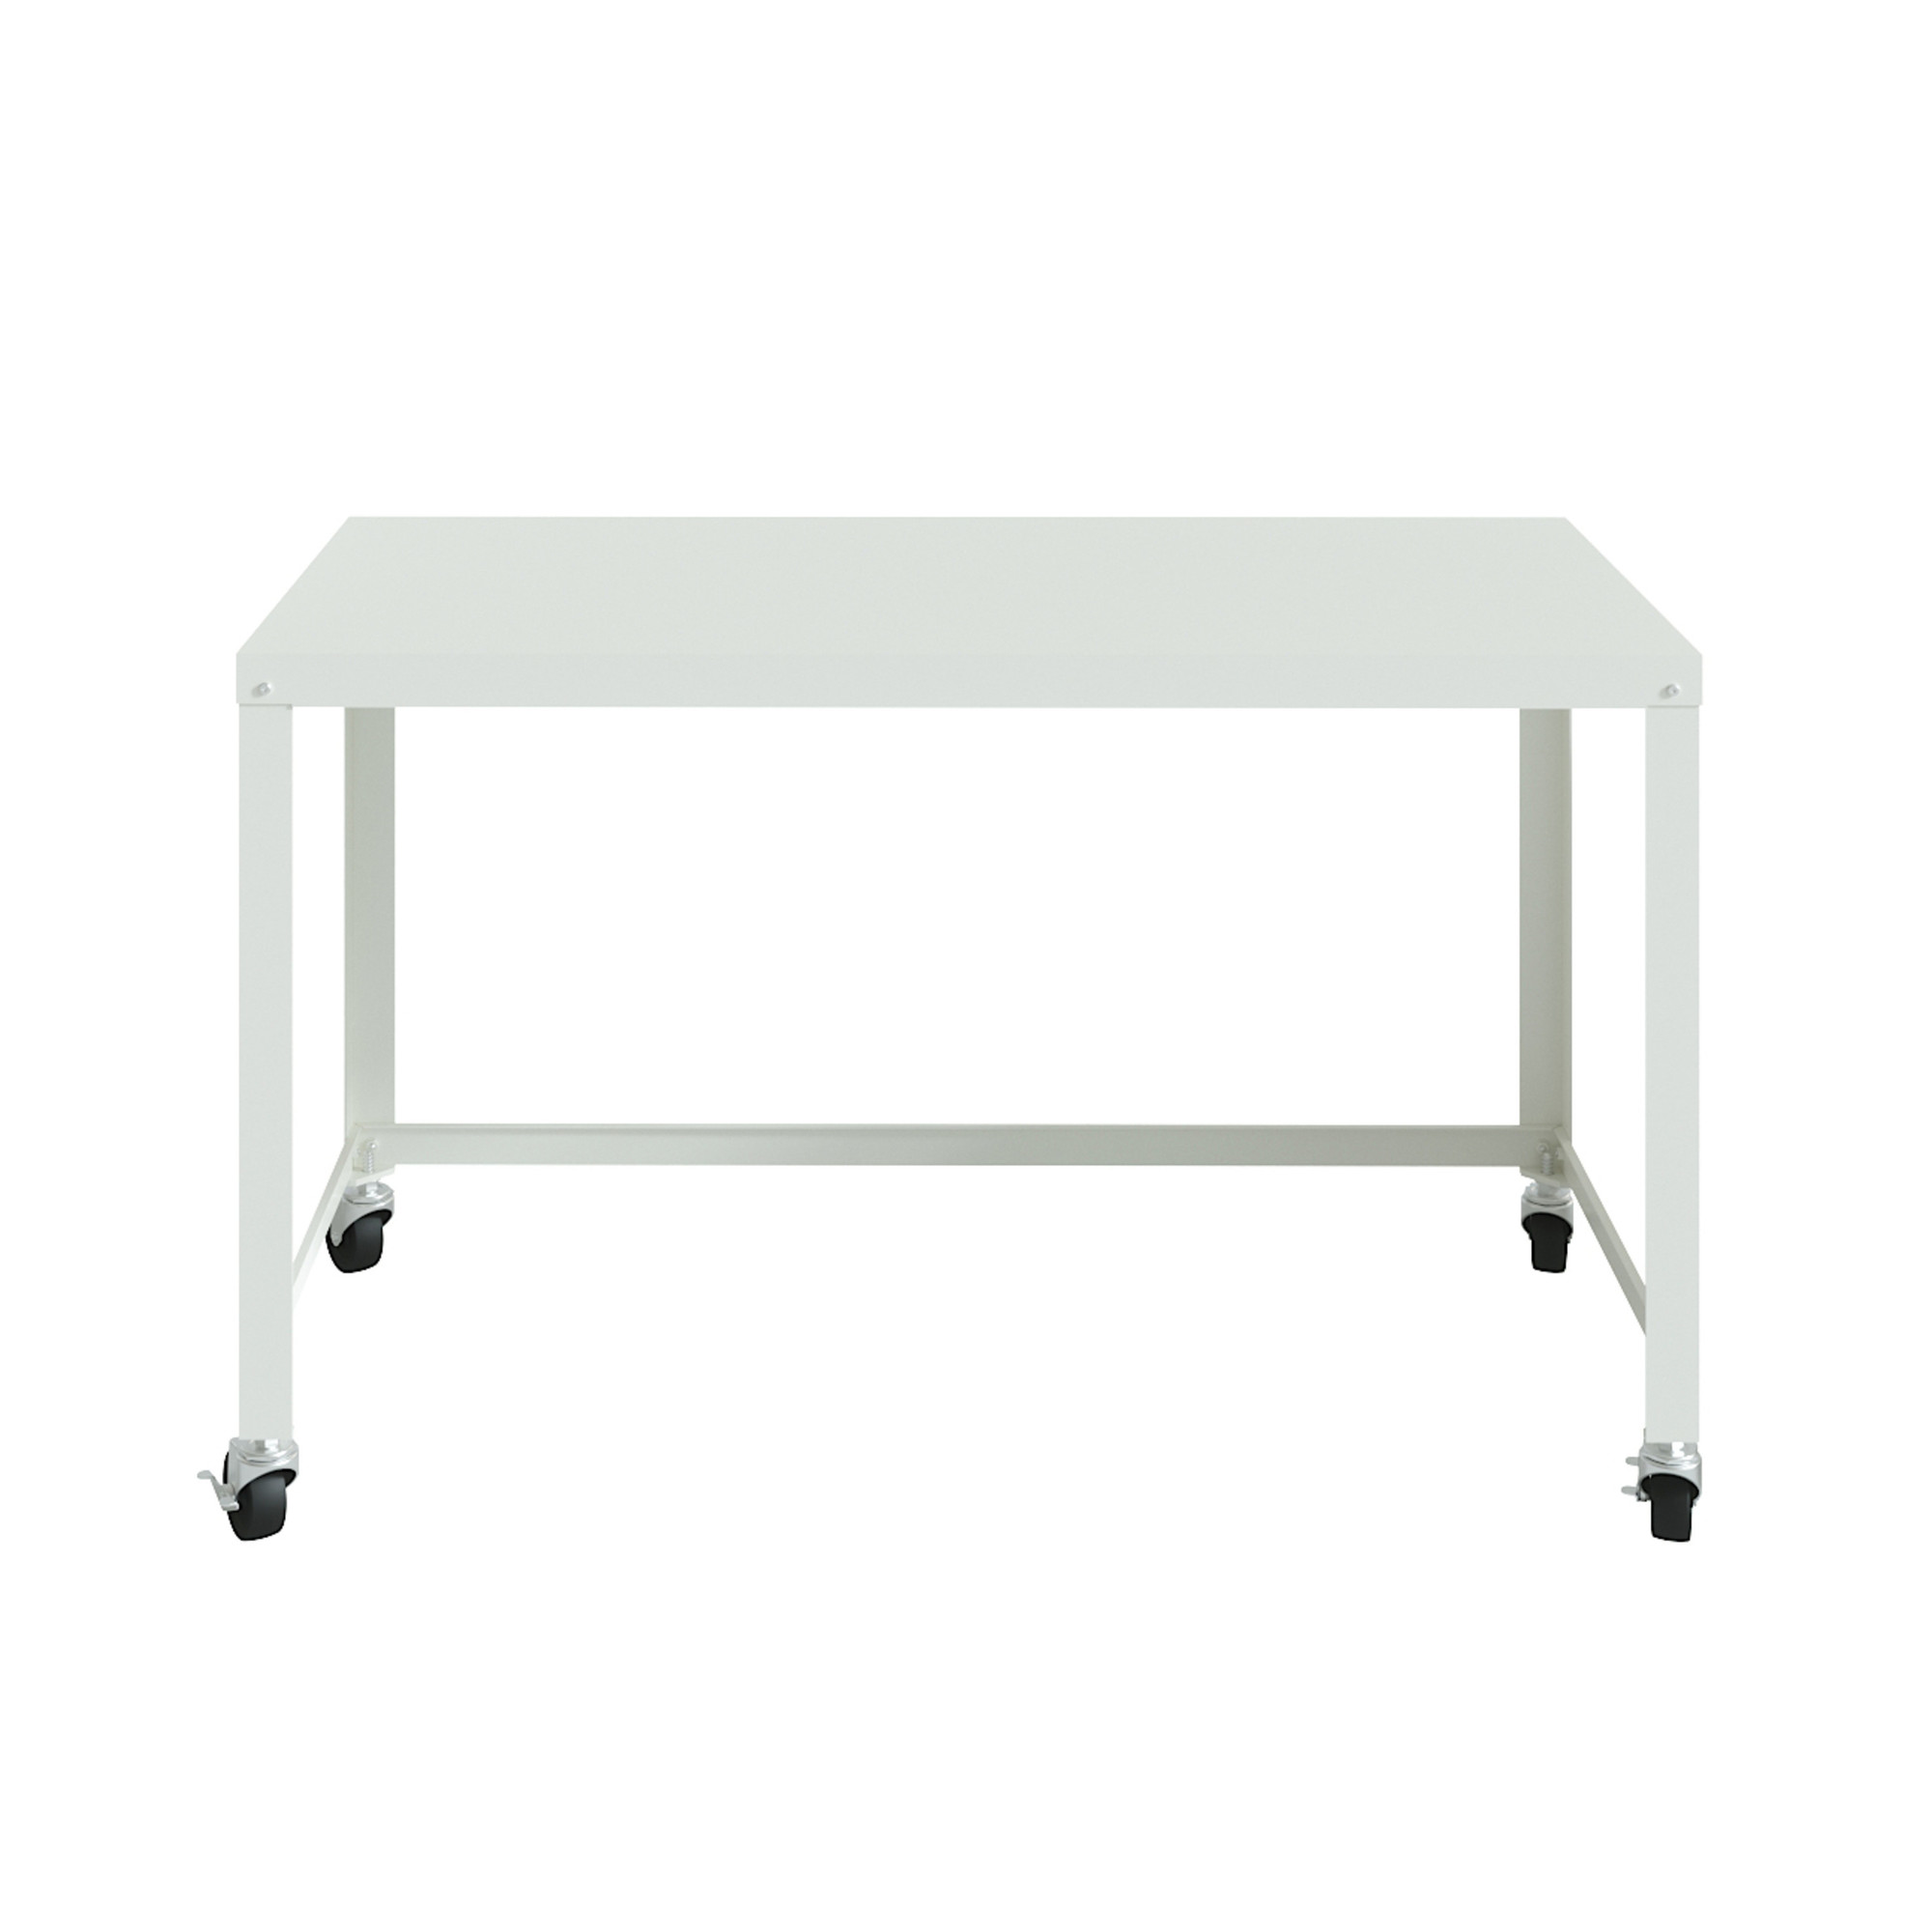 Hirsh Industries, RTA 48Inch Mobile Desk for Home Office, Width 47.45 in, Height 29.6 in, Depth 23.88 in, Model 21114